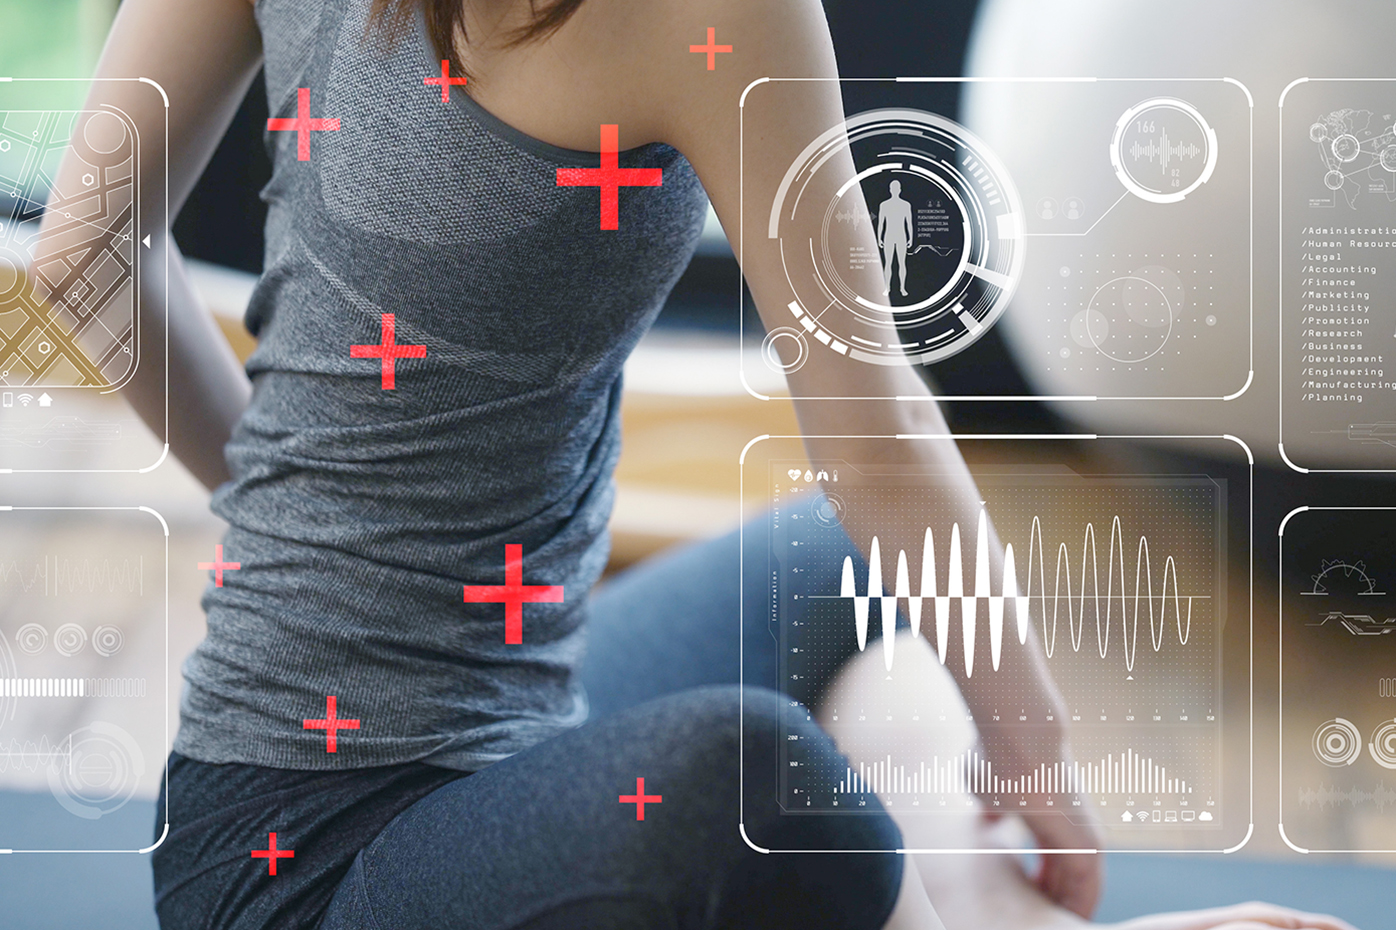 Data and wearables and wellness and exercise